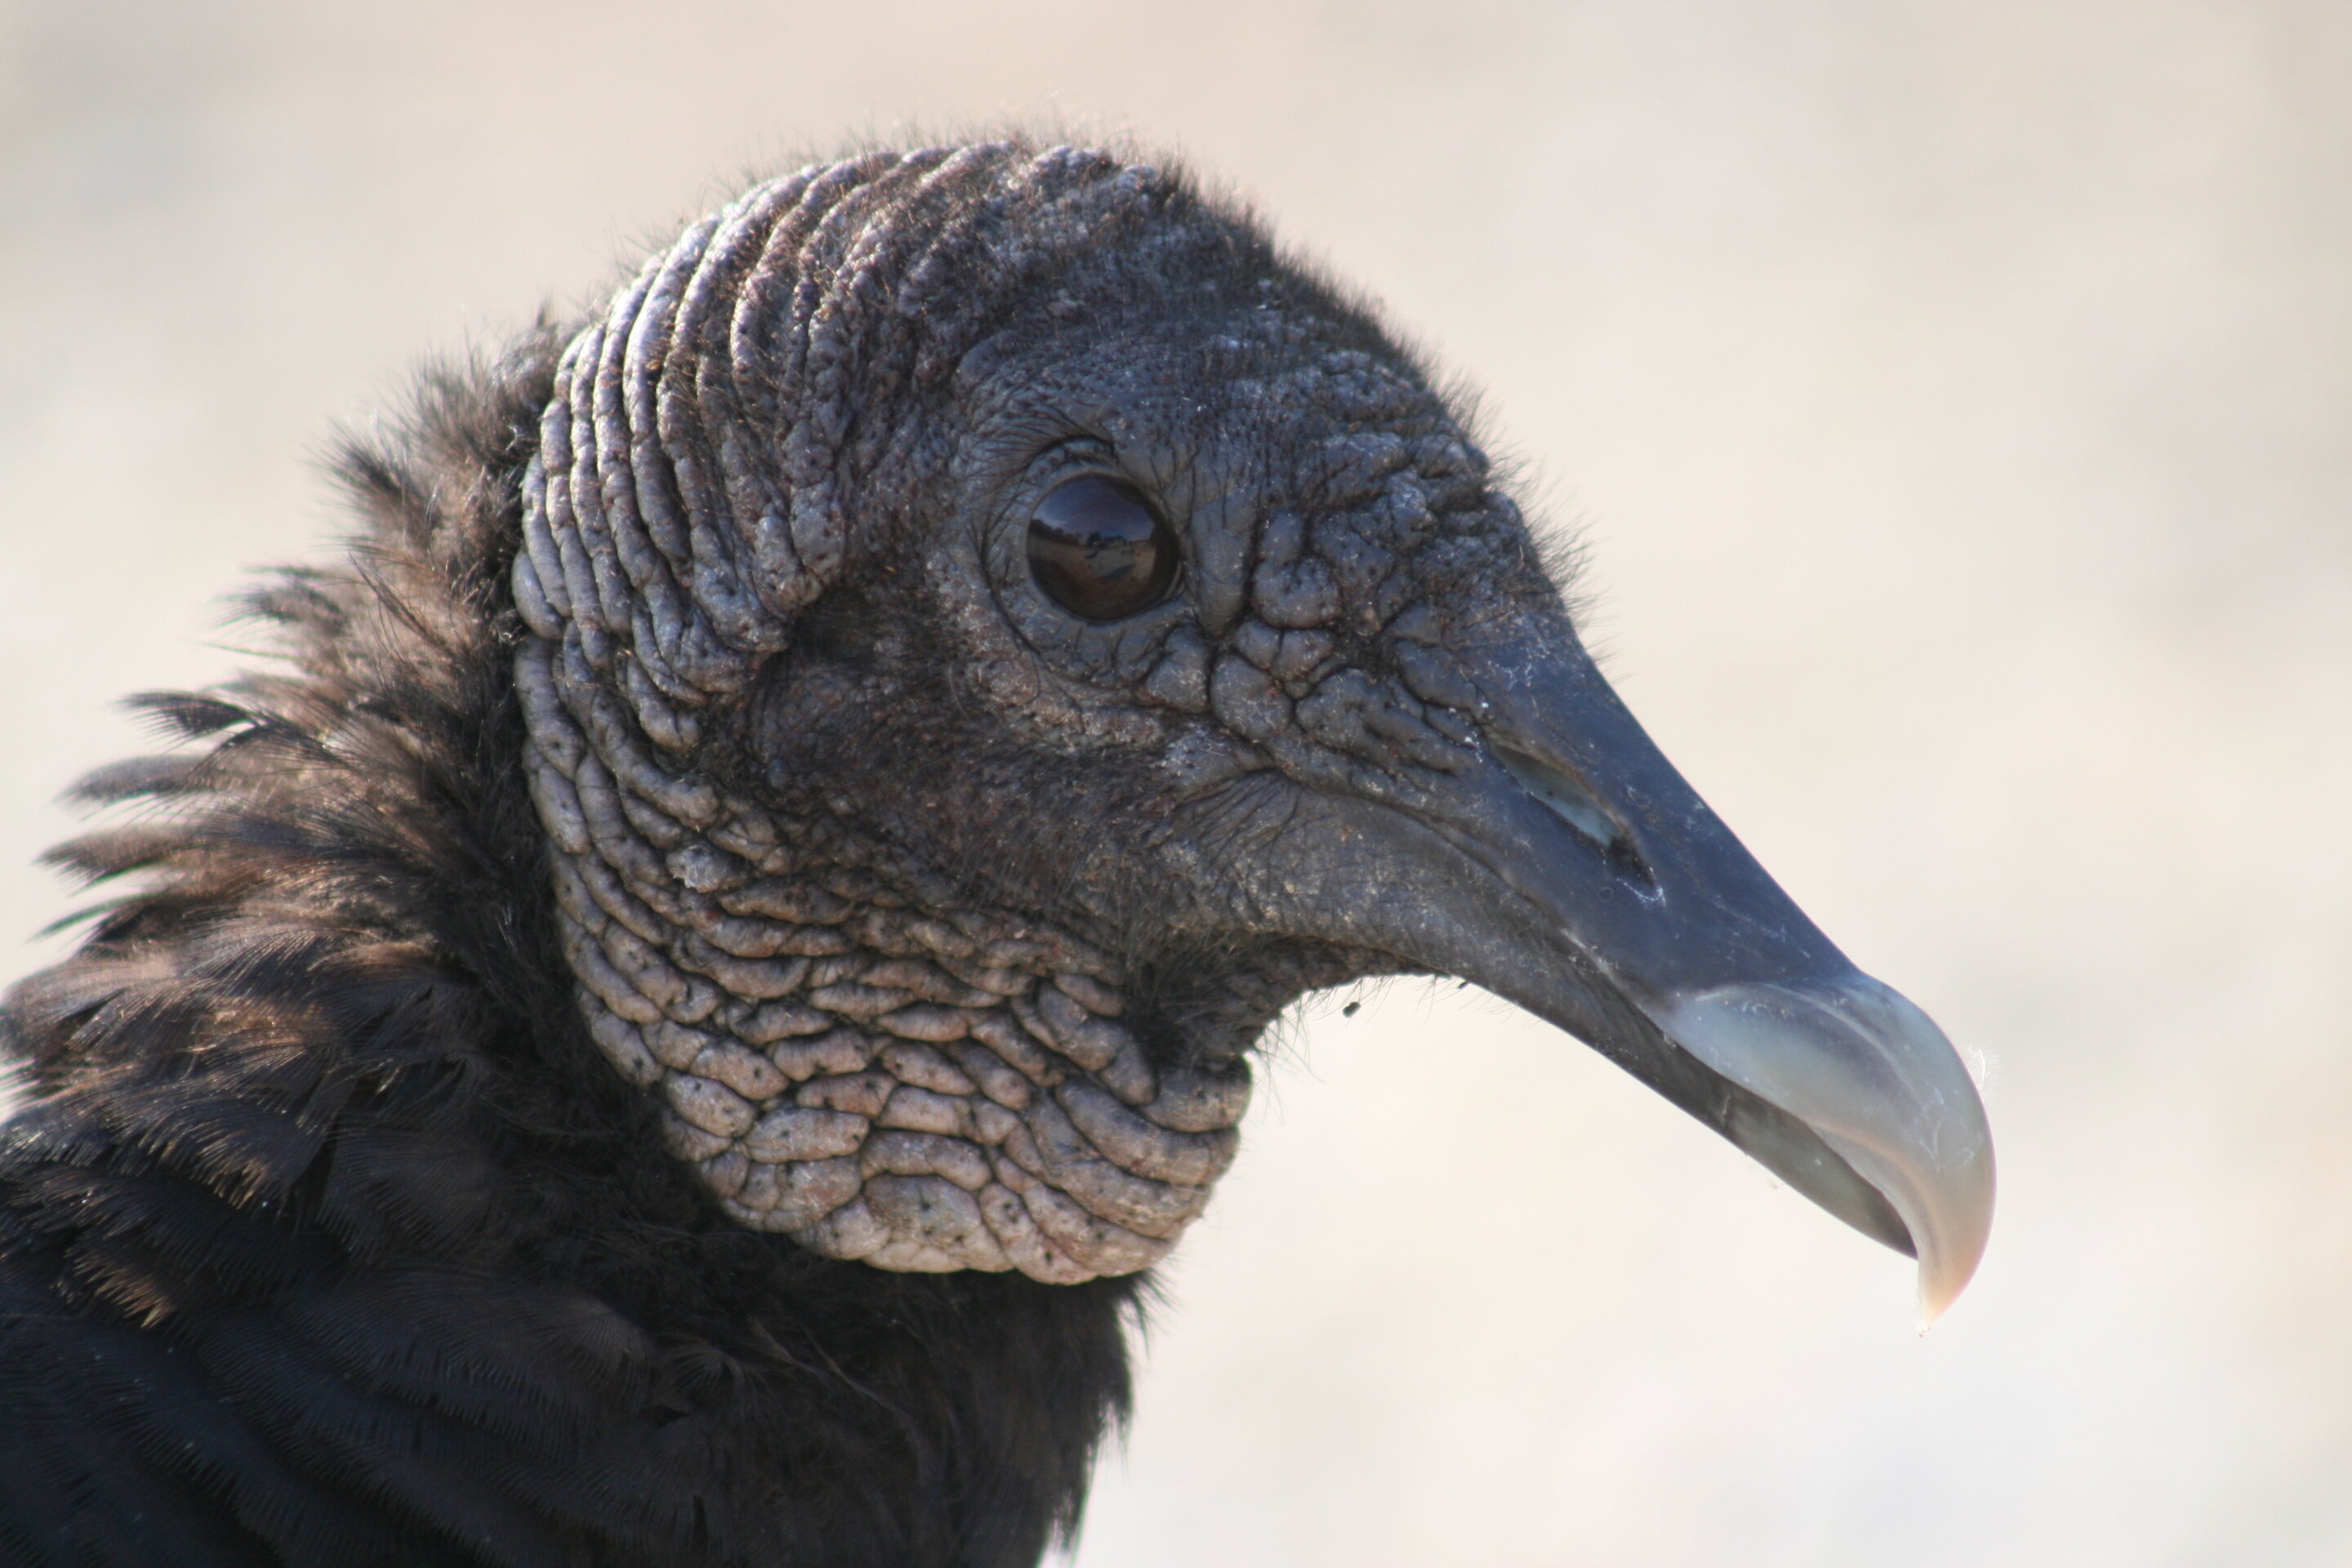 Spanish vultures released in Cyprus to replenish population